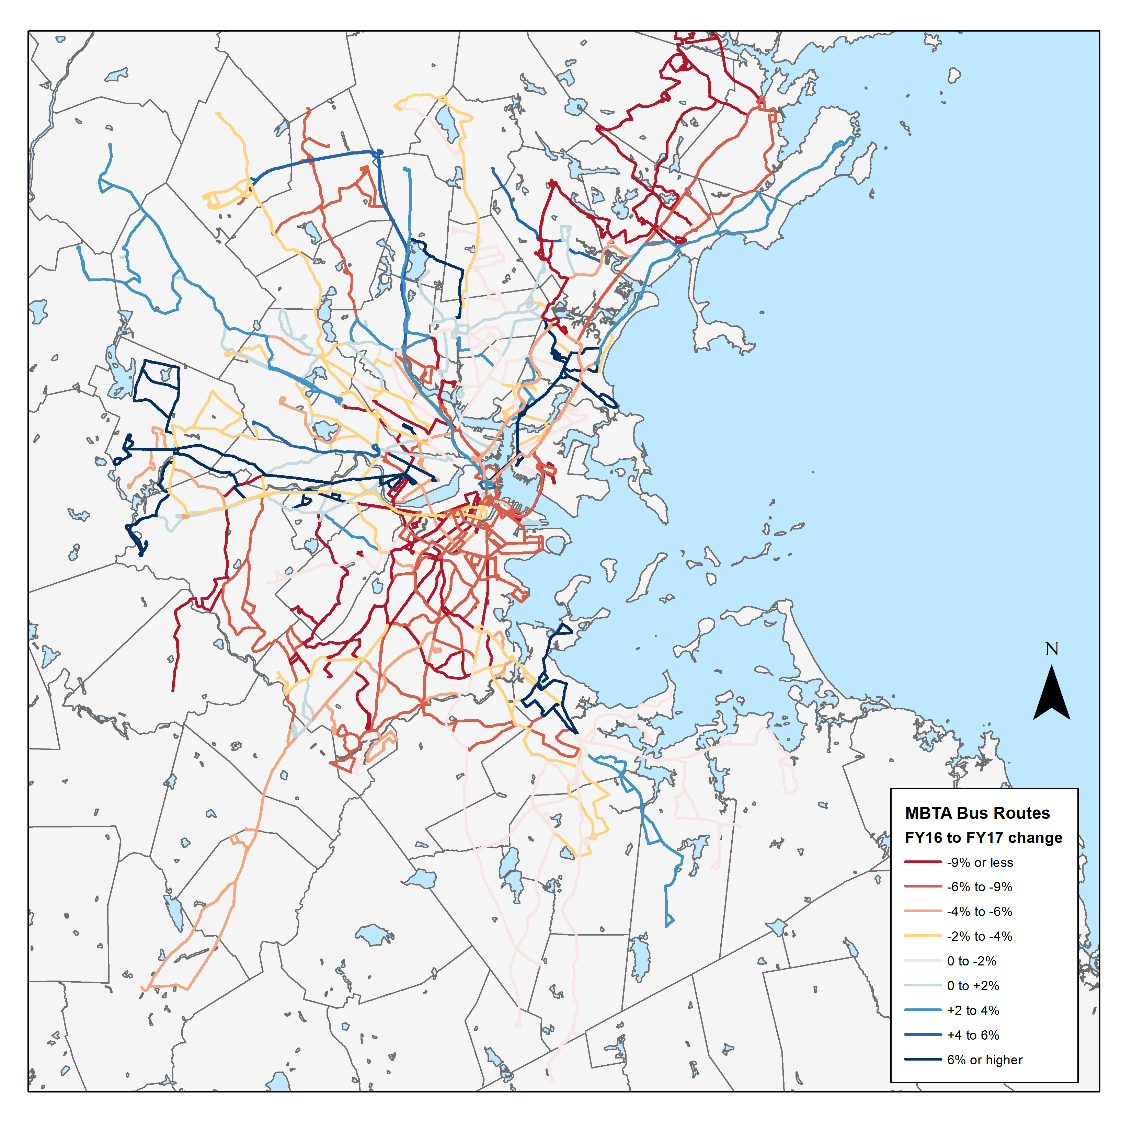 Map showing the change in ridership among MBTA bus routes as they exist spatially.